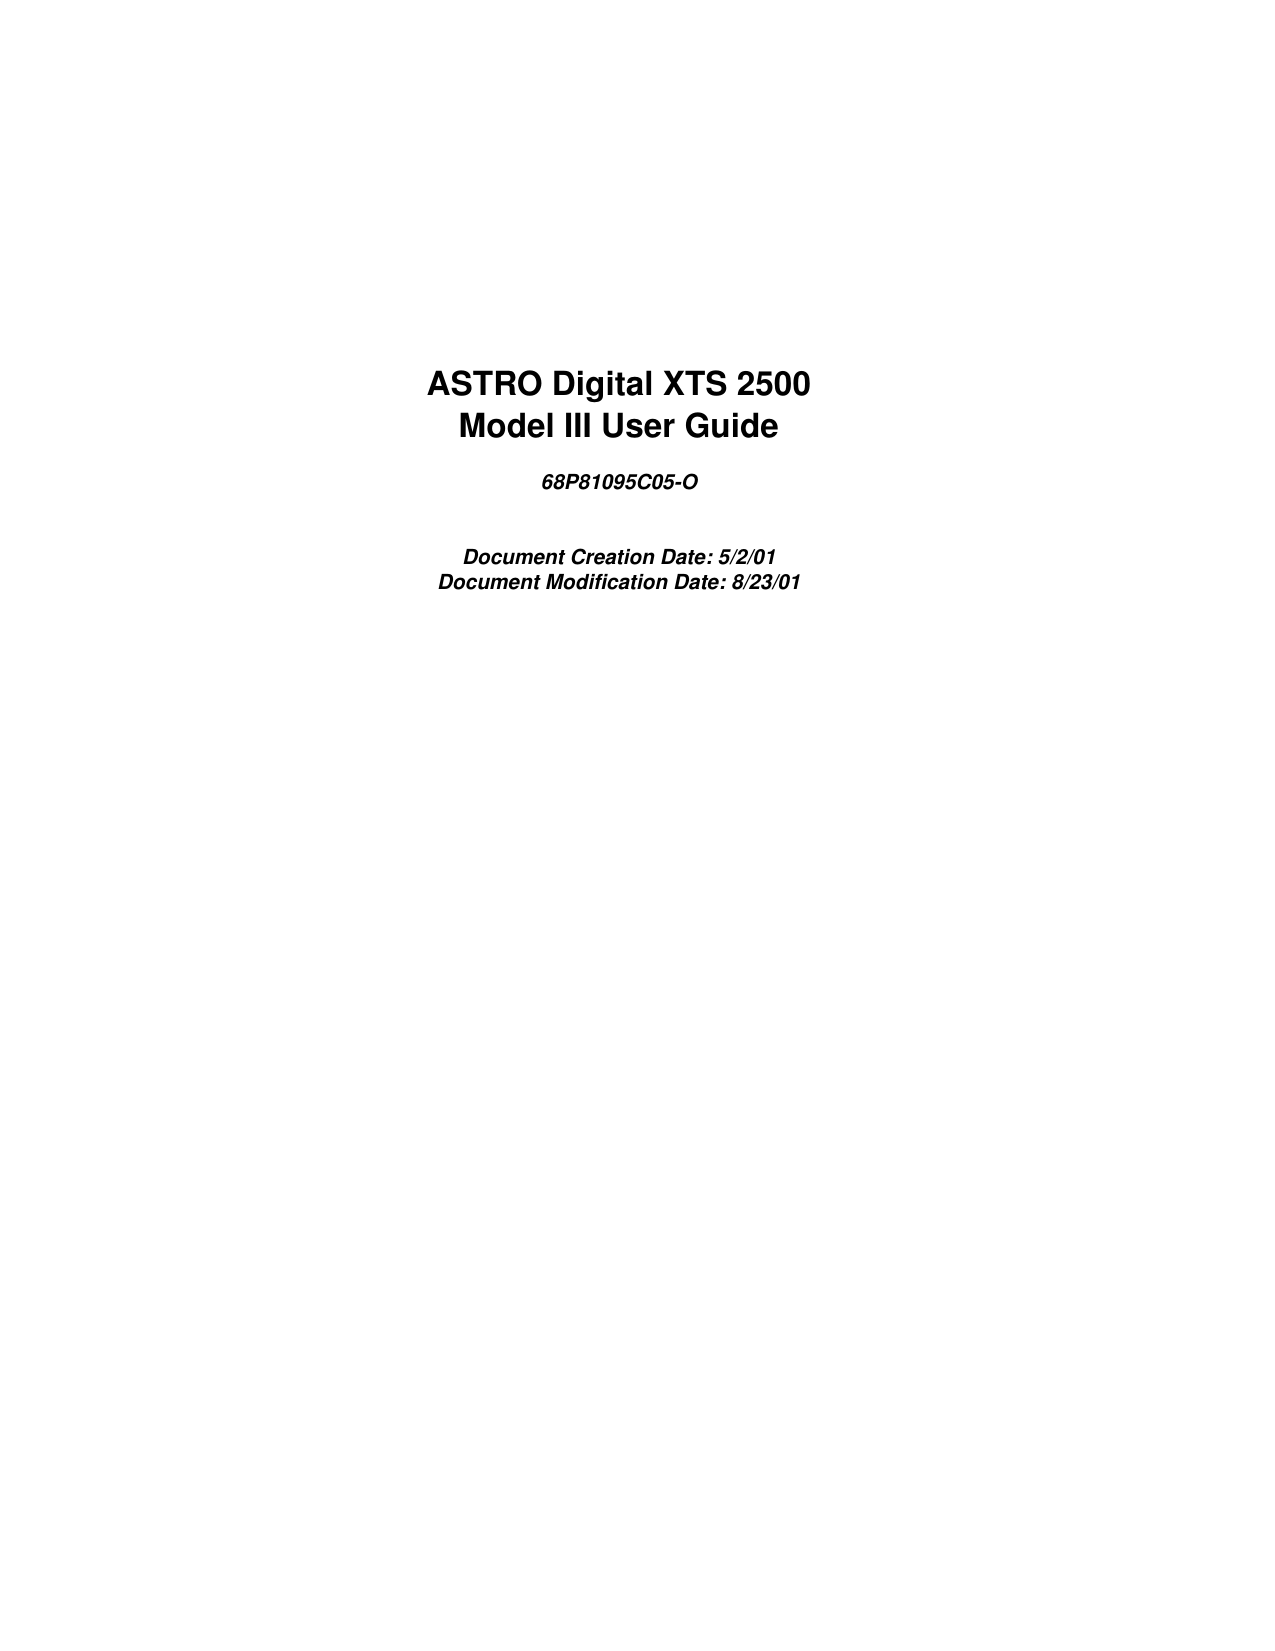 ASTRO Digital XTS 2500 Model III User Guide68P81095C05-ODocument Creation Date: 5/2/01Document Modification Date: 8/23/01